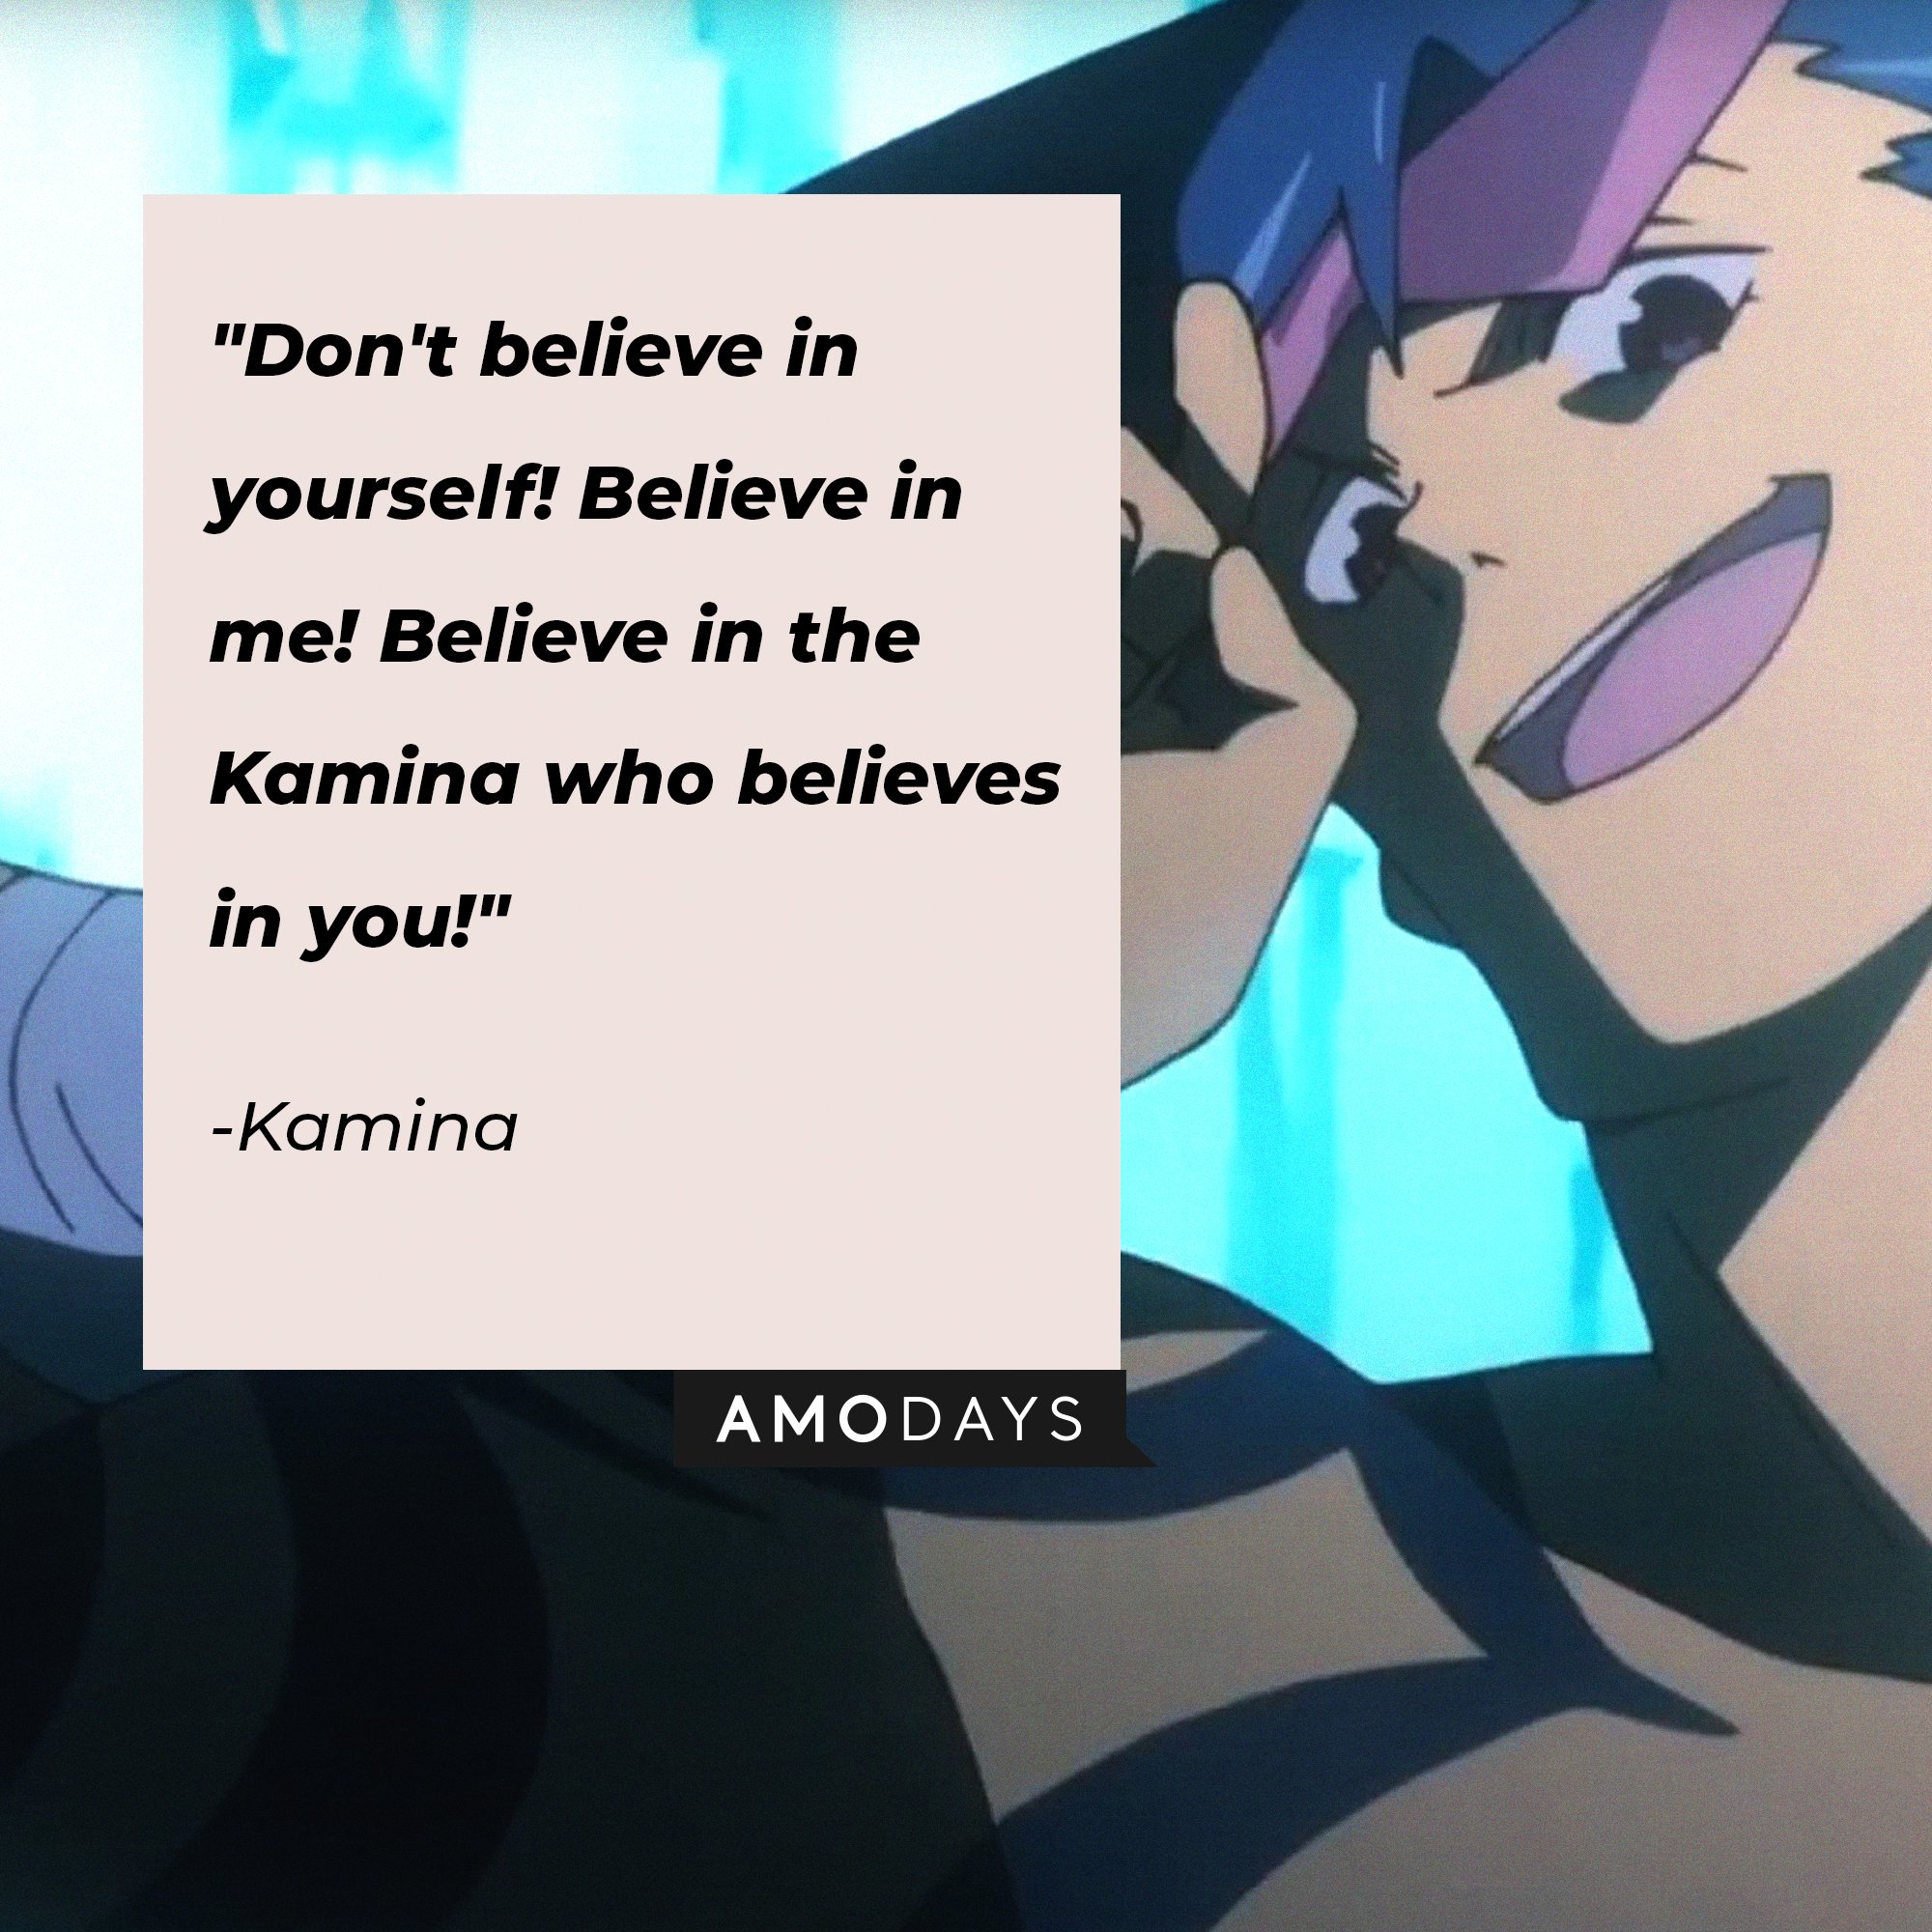 Kamina's quote: "Don't believe in yourself! Believe in me! Believe in the Kamina who believes in you!" | Image: AmoDays    